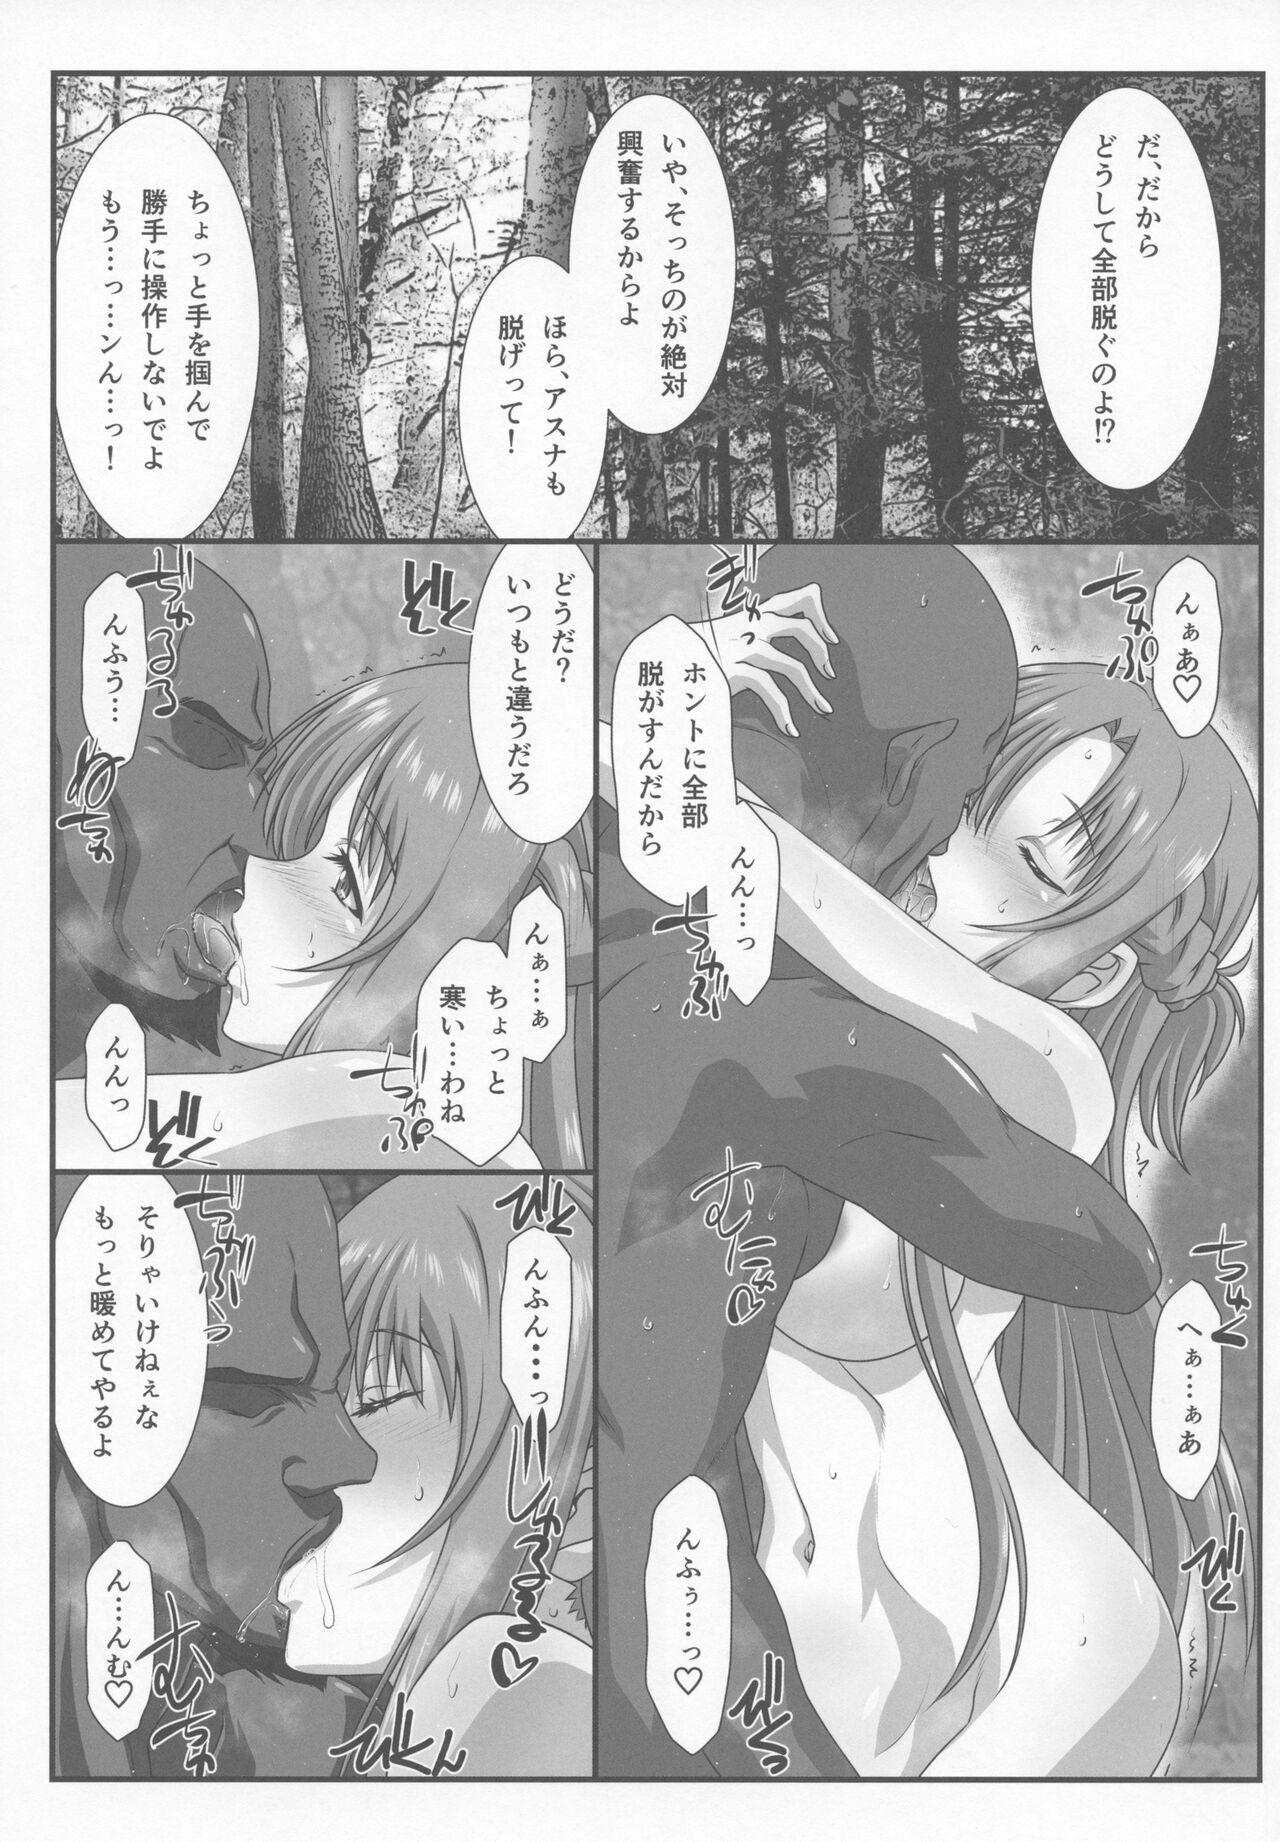 Gayporn Astral Bout Ver. 45 - Sword art online Class - Page 4